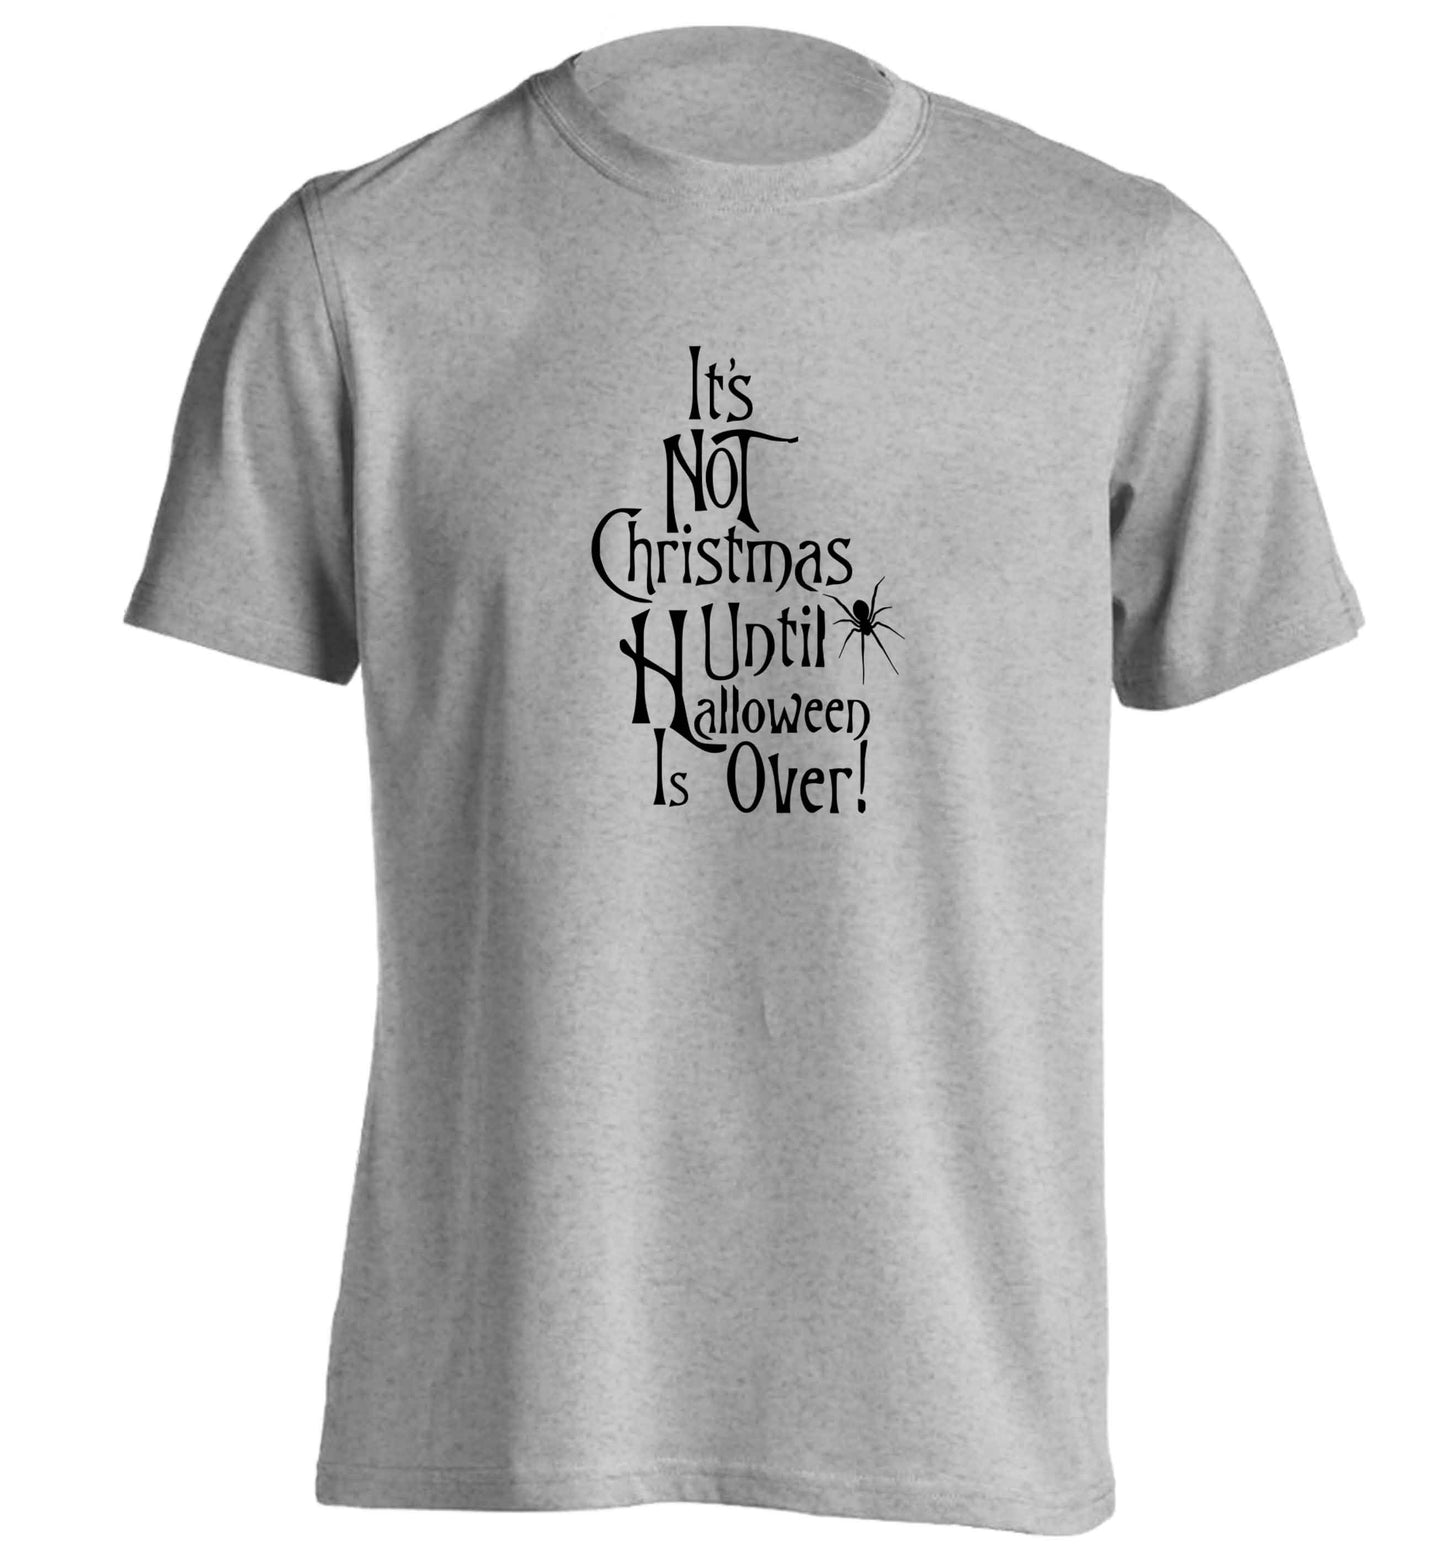 It's not Christmas until Halloween is over adults unisex grey Tshirt 2XL